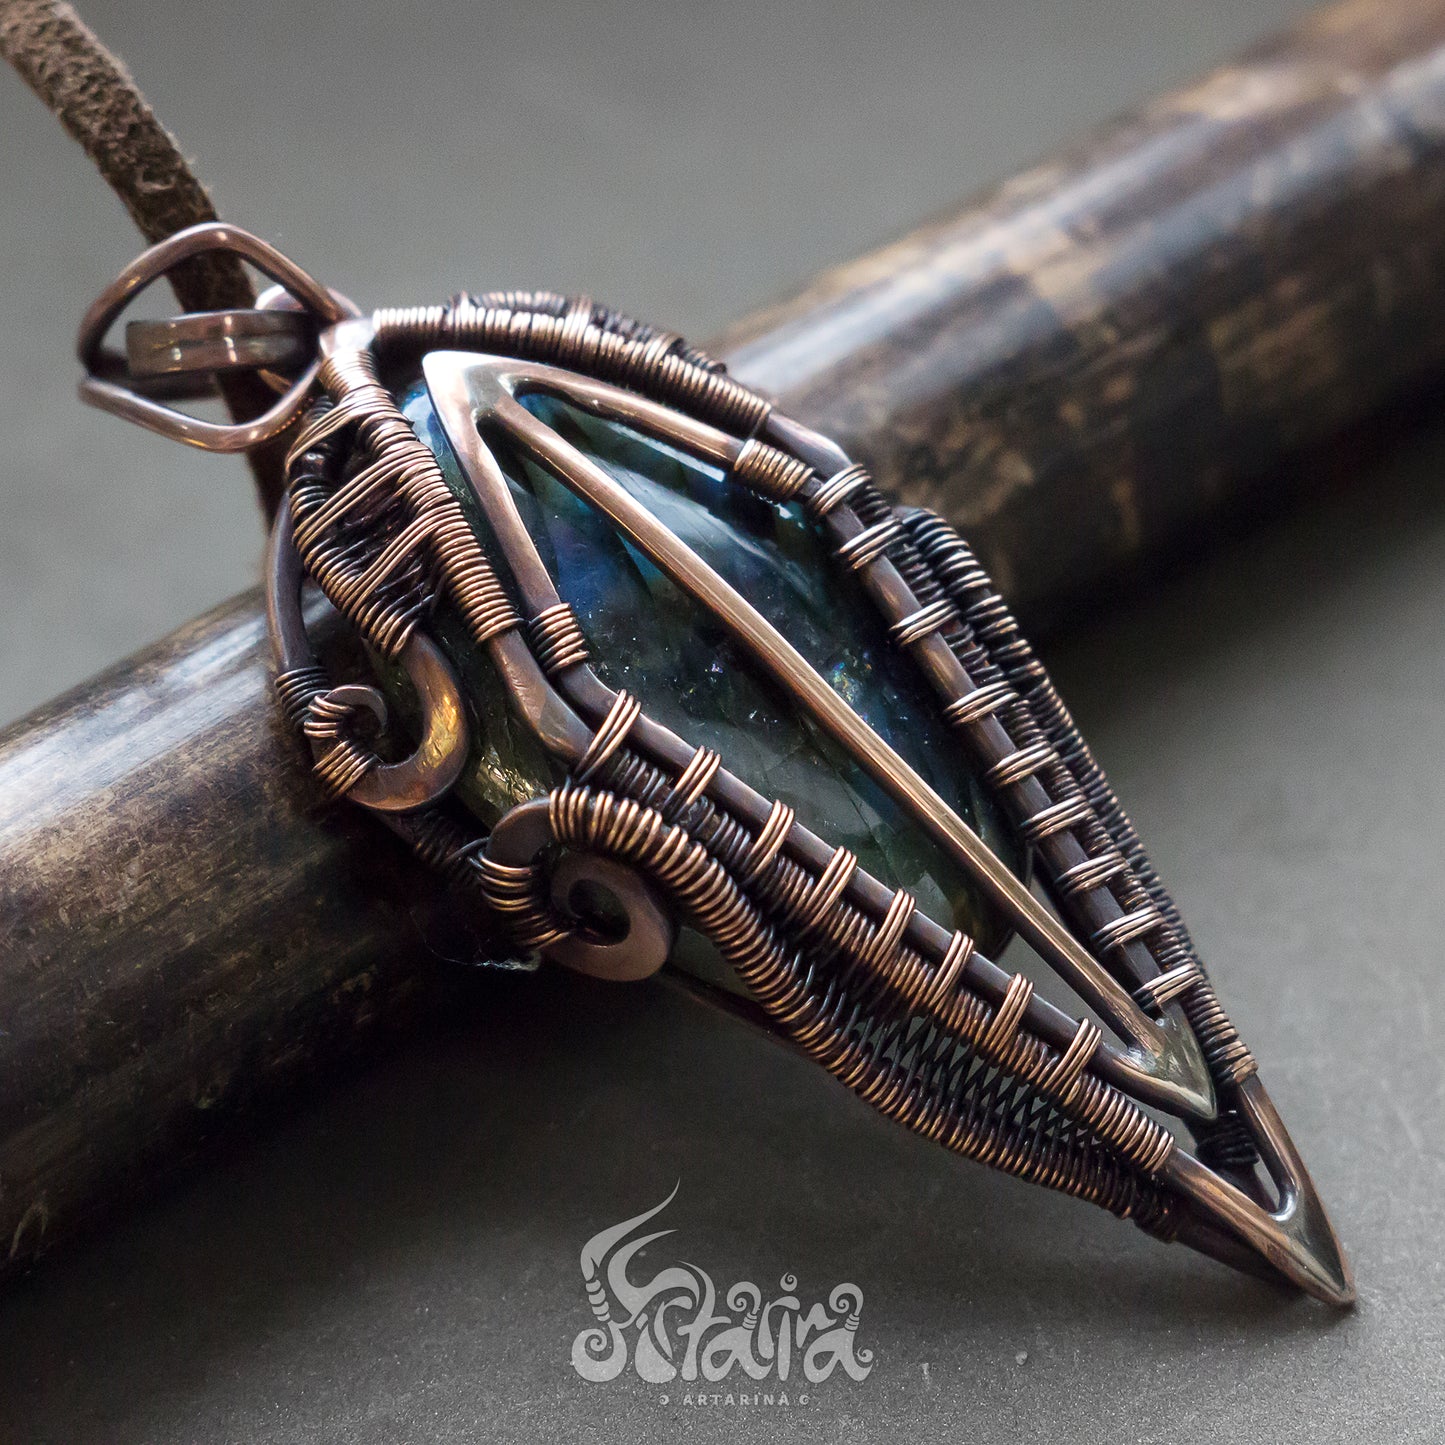 Copper wire wrapped handcrafted jewelry pendant with natural multicolored labradorite stone. Handmade necklace wire weaved neck piece made from raw natural copper by hands. Artarina jewelry